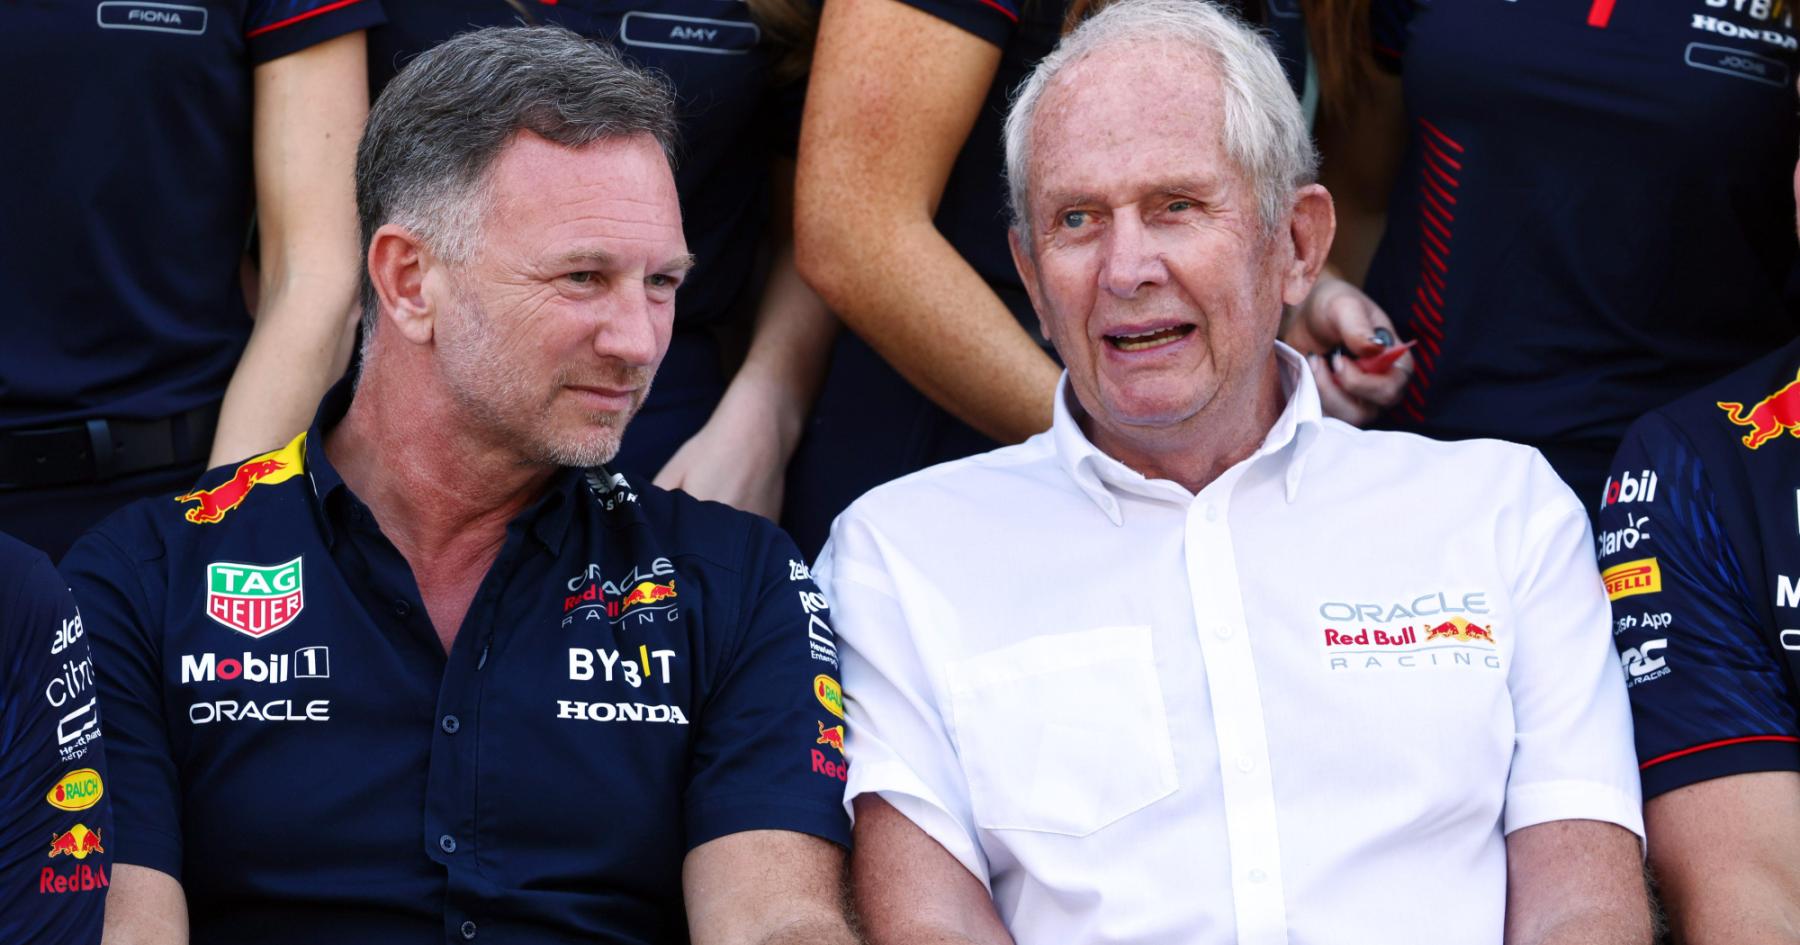 Revving Up Success: Marko Calls for Teamwork to Secure Championships at Red Bull